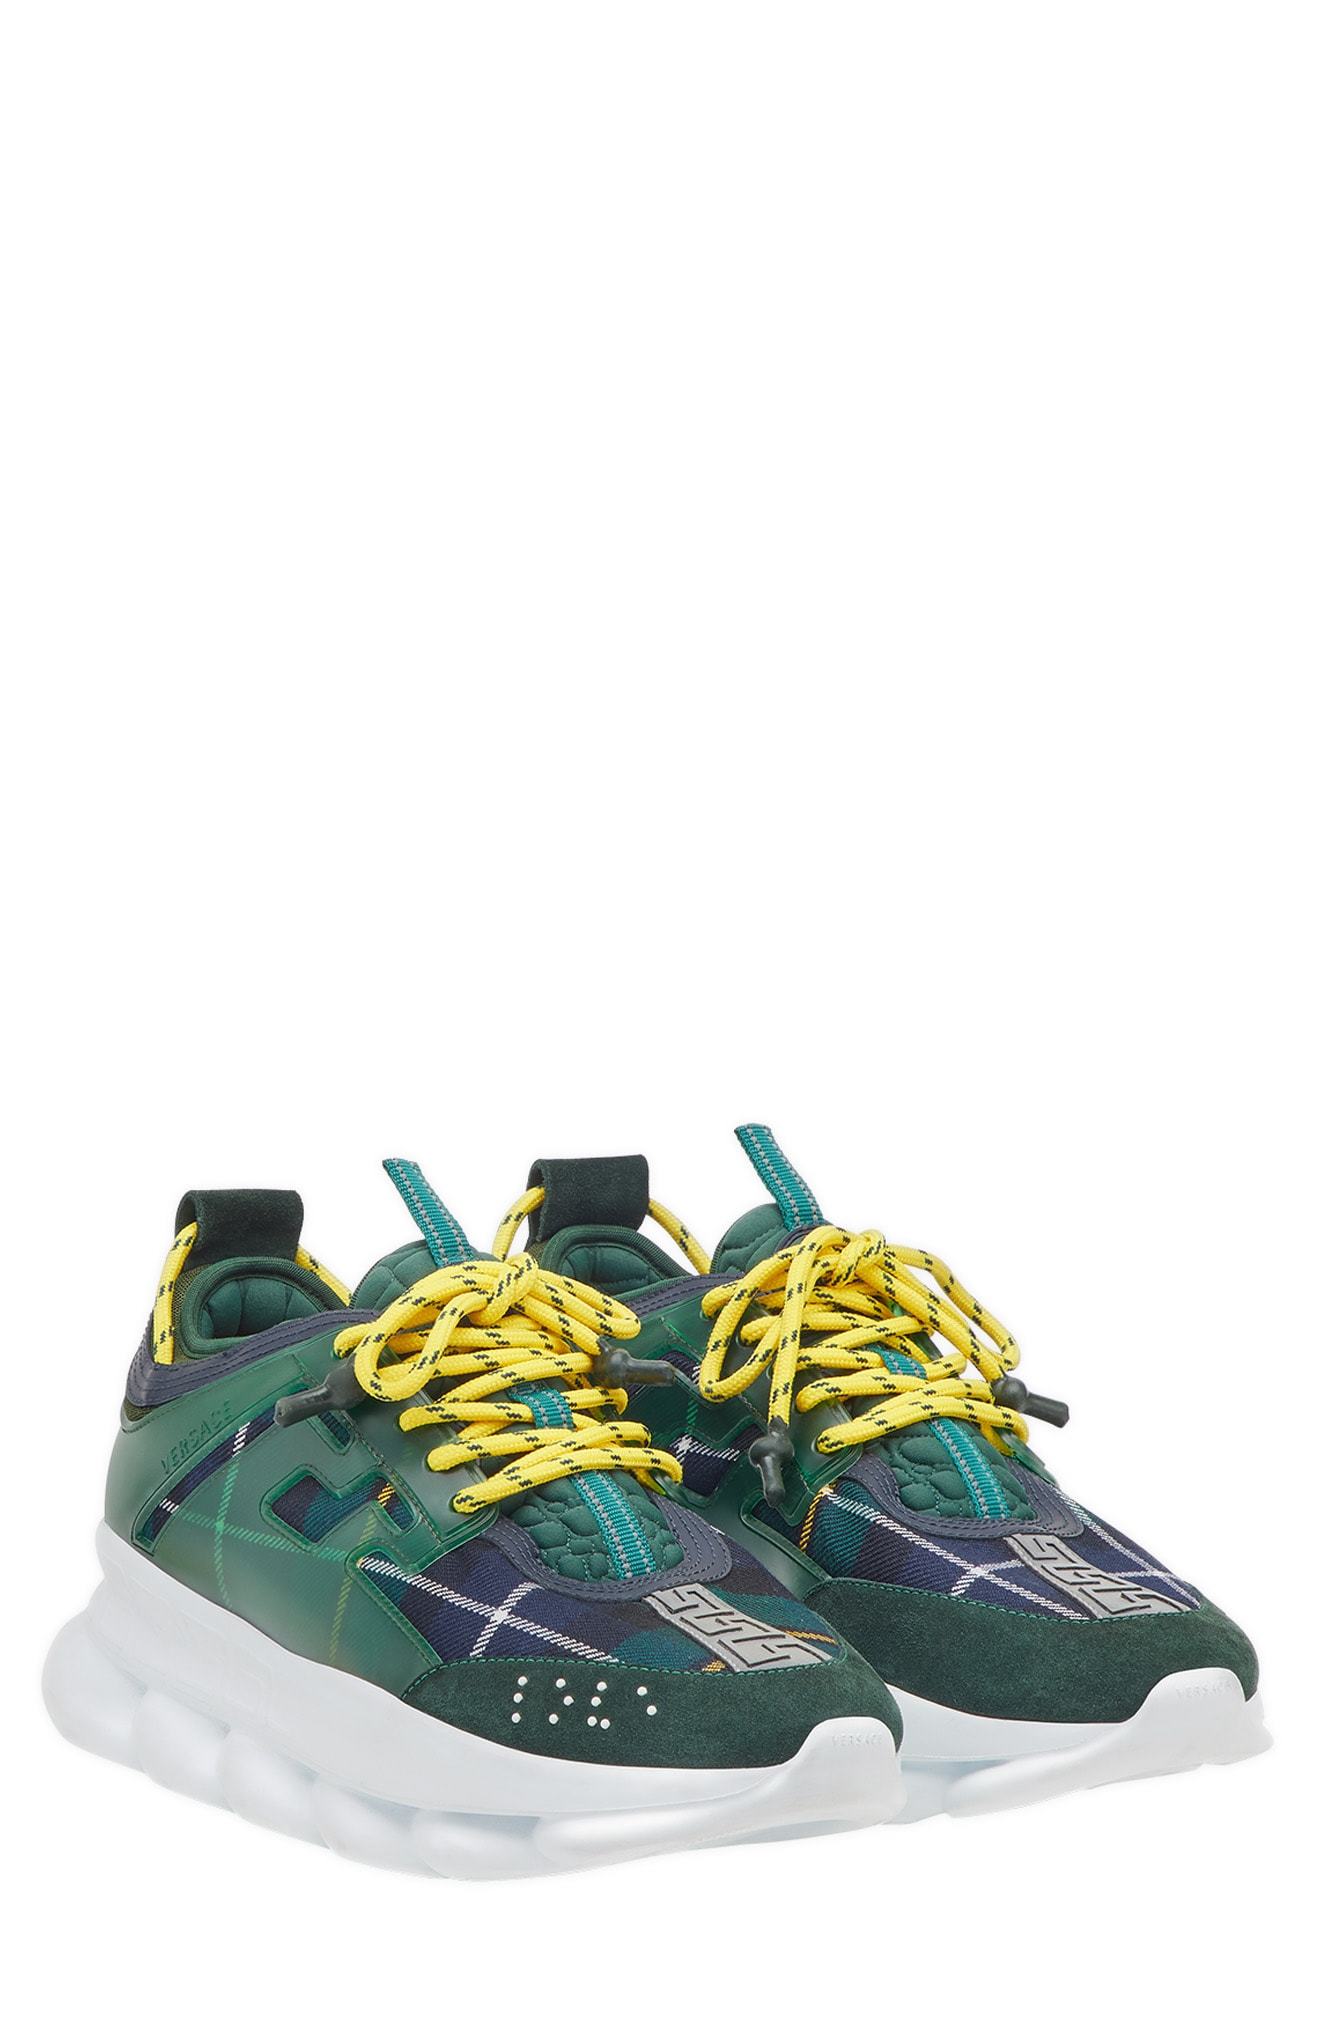 green versace shoes